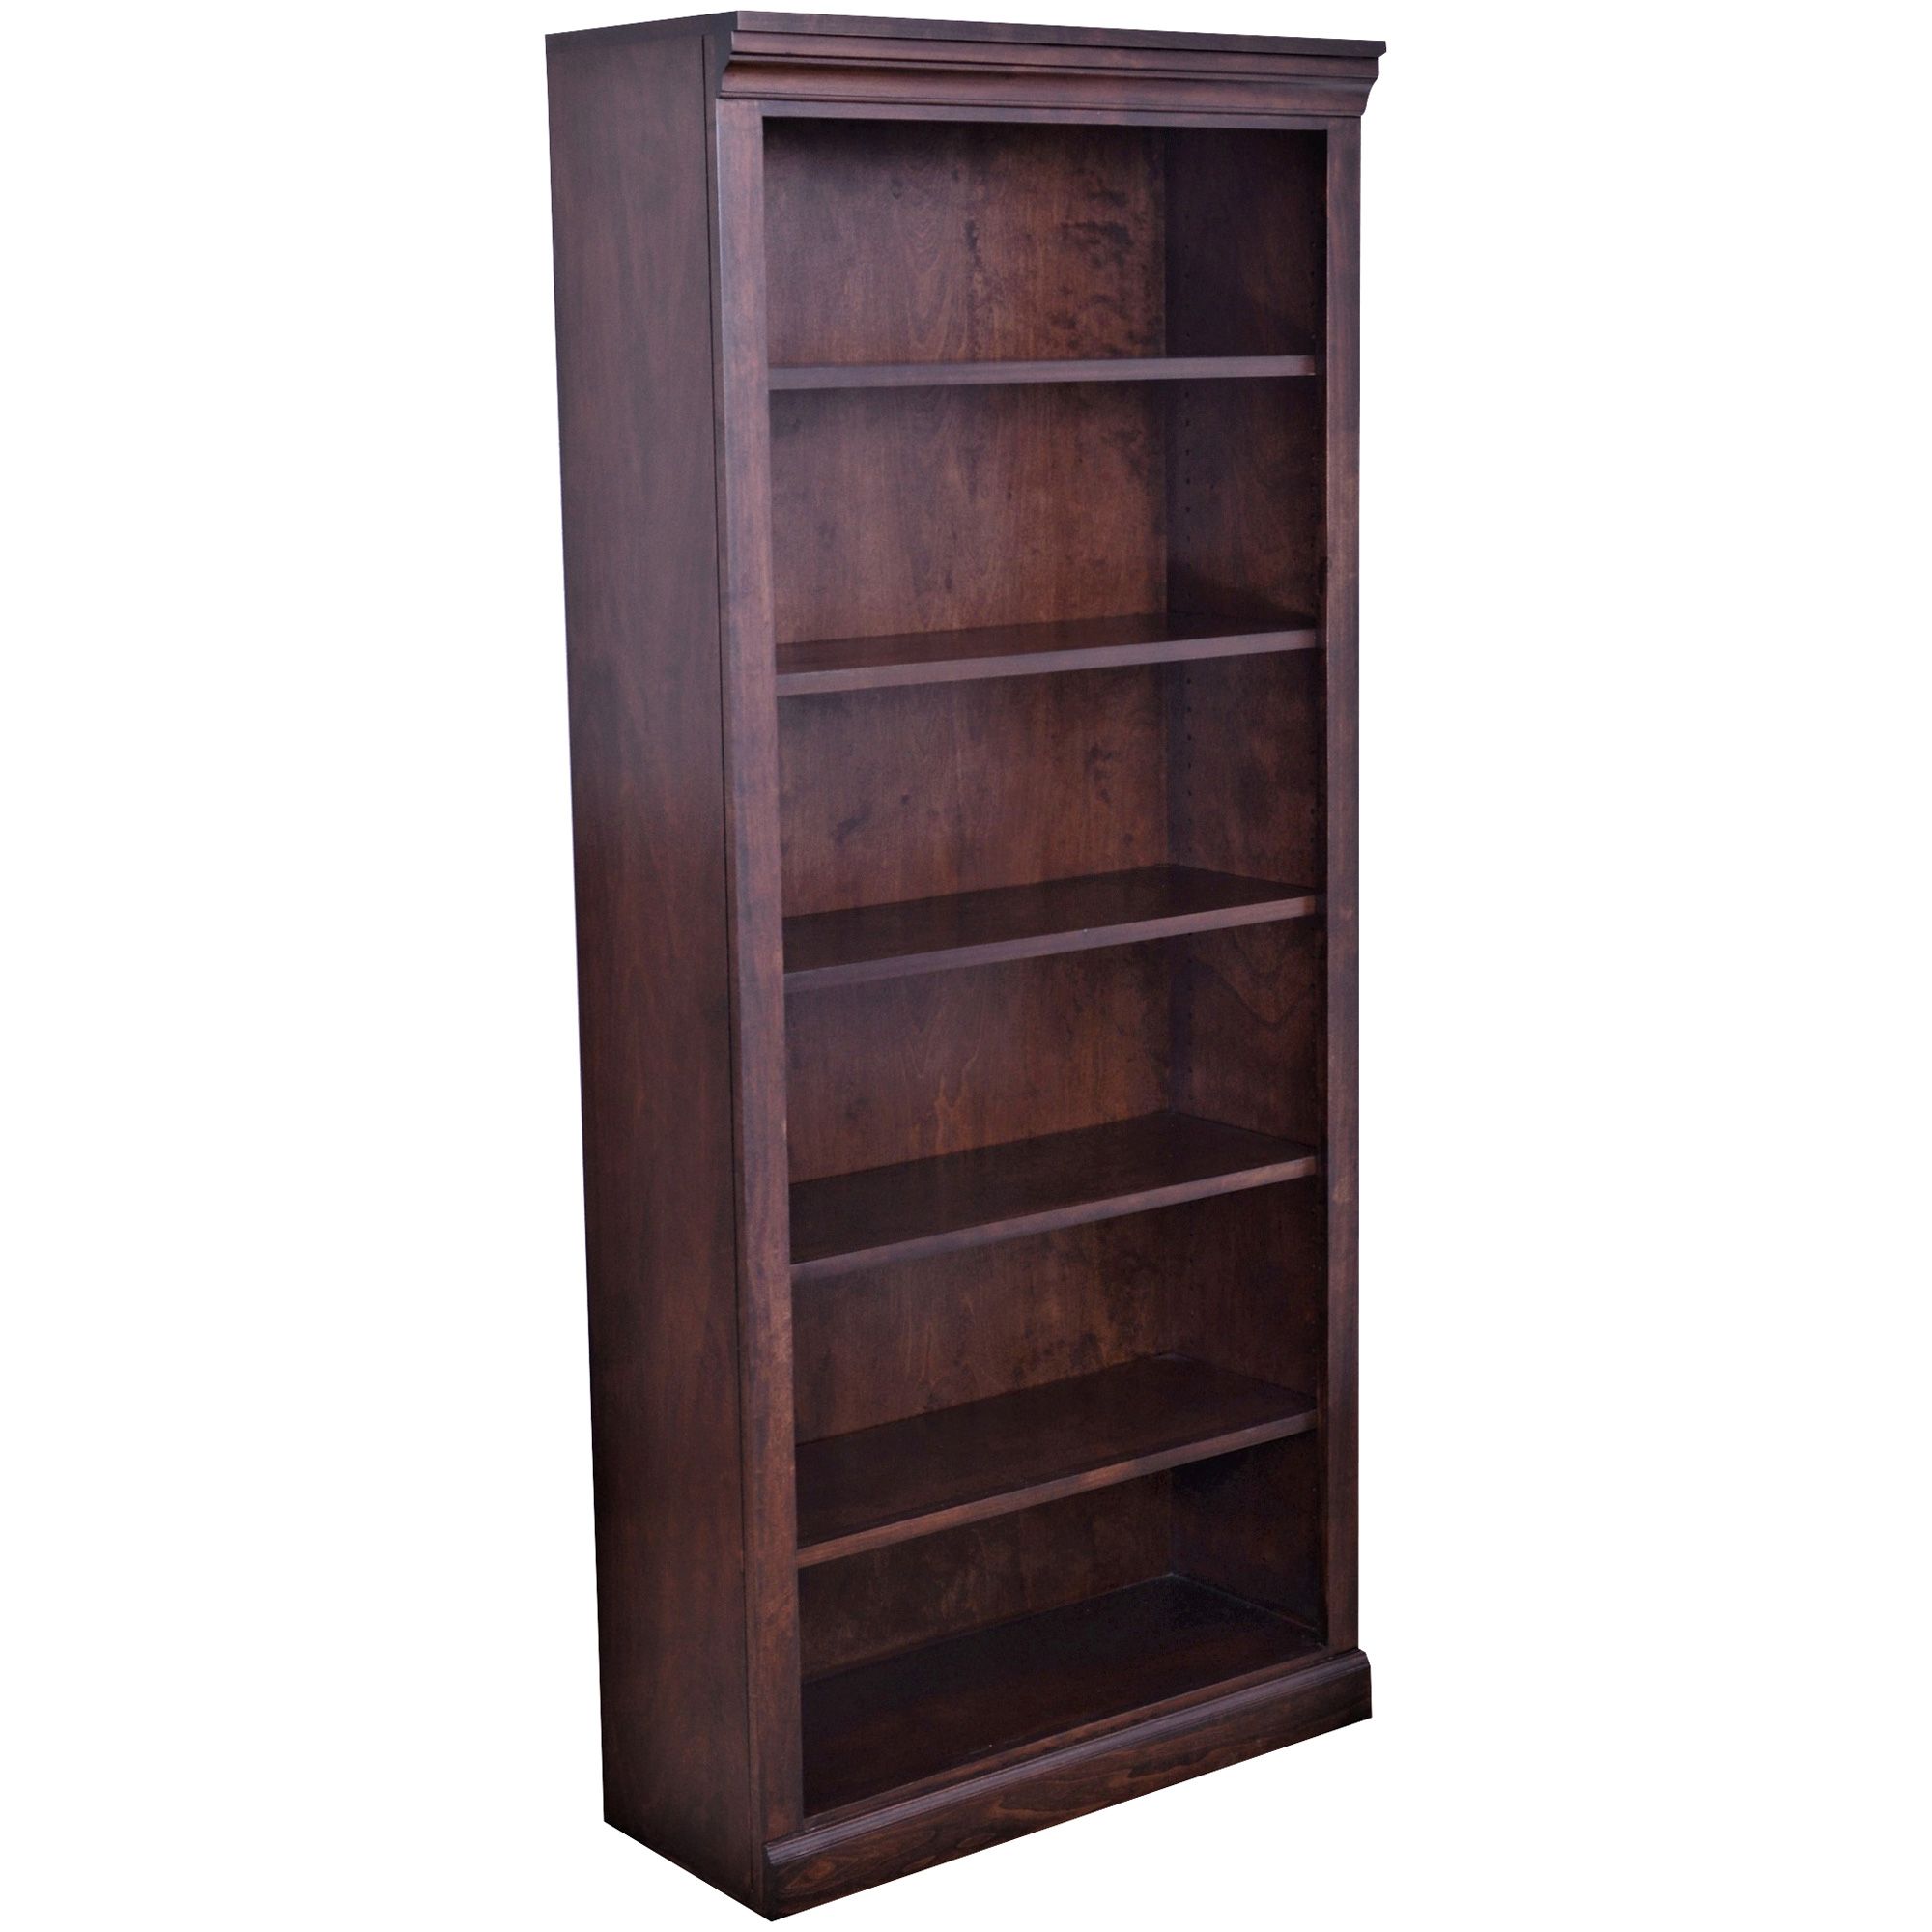 Classic 72 Inch Bookcase | Home Decor | Slumberland Intended For 72 Inch Bookcases (View 3 of 15)